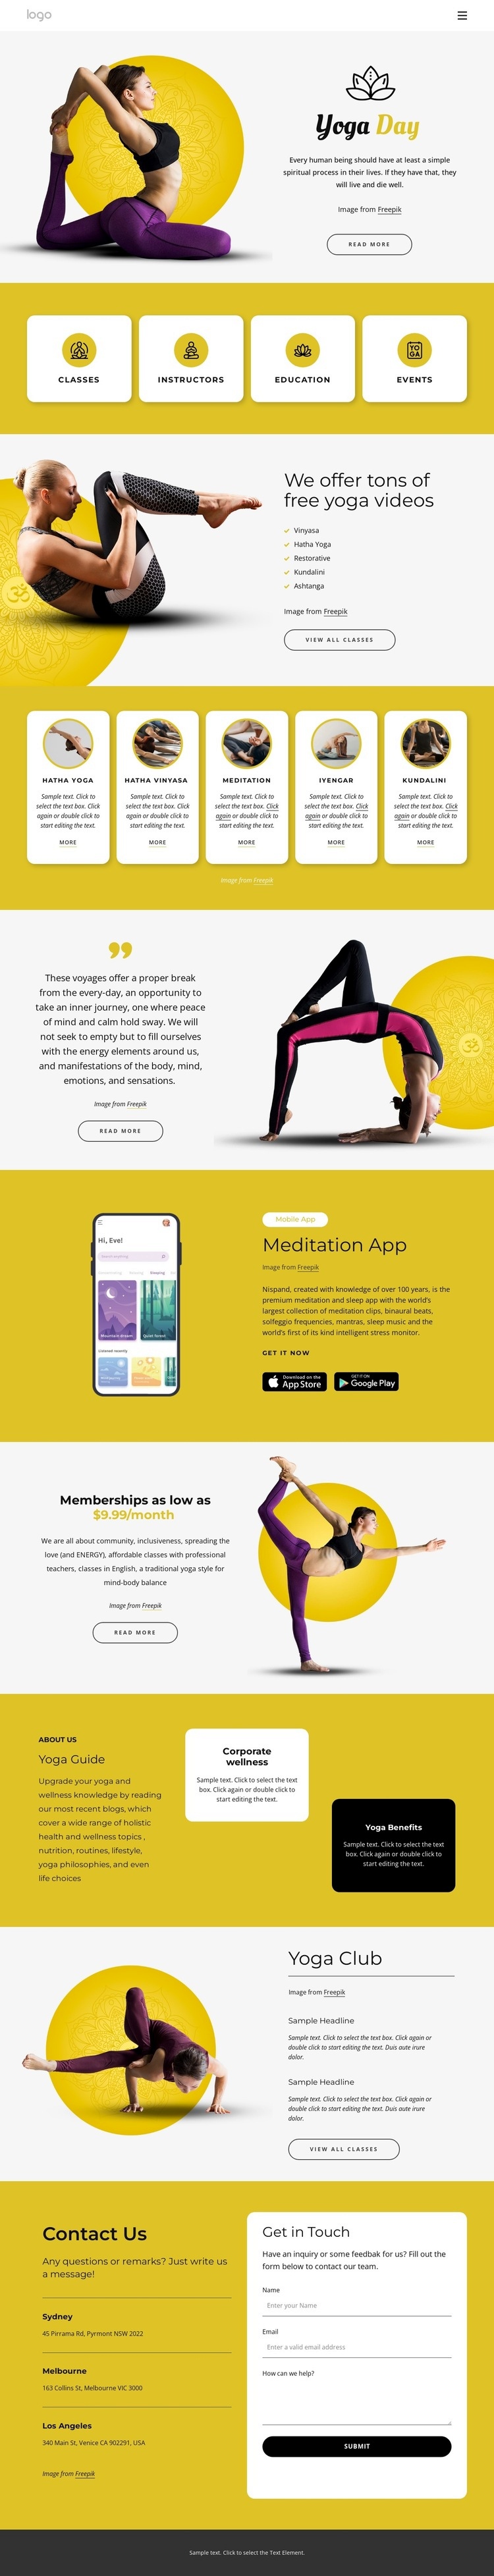 Yoga events and classes Squarespace Template Alternative